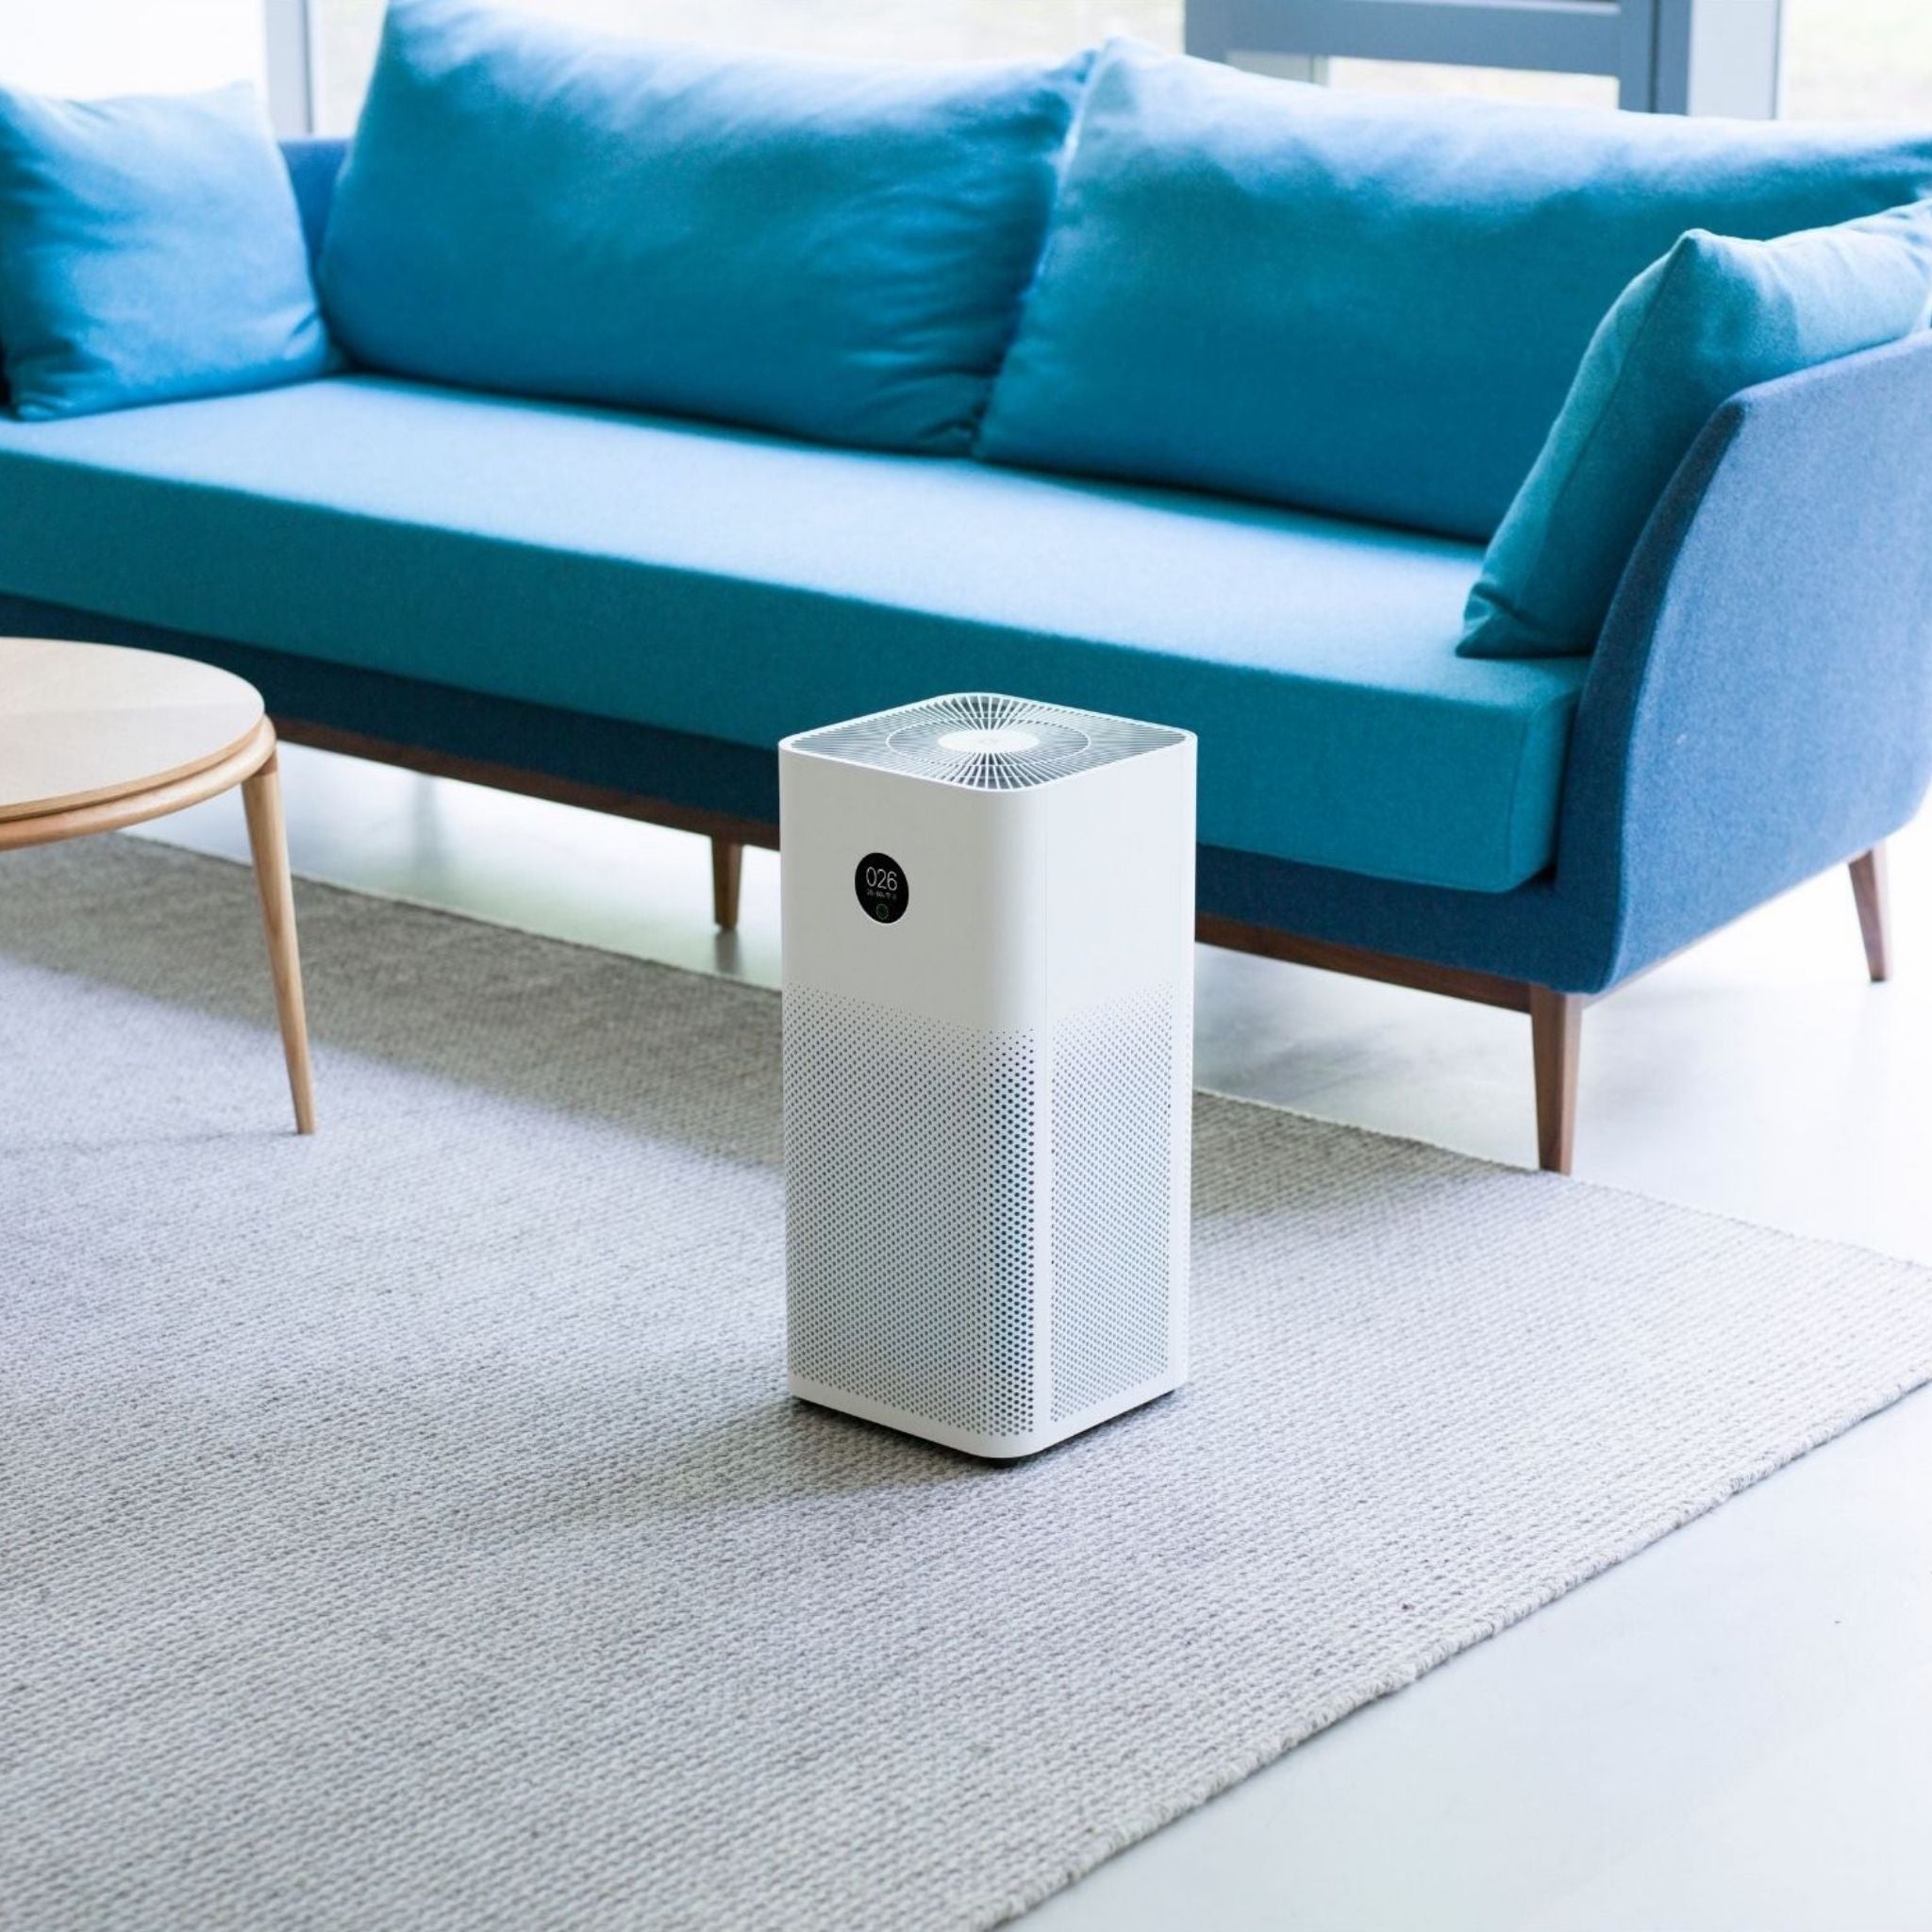 Mi Air Purifier 3H for home, high efficiency filter eliminate 99.97% smoke pollen dust, quiet for large space up to 484sq ft, for living room, bedroom